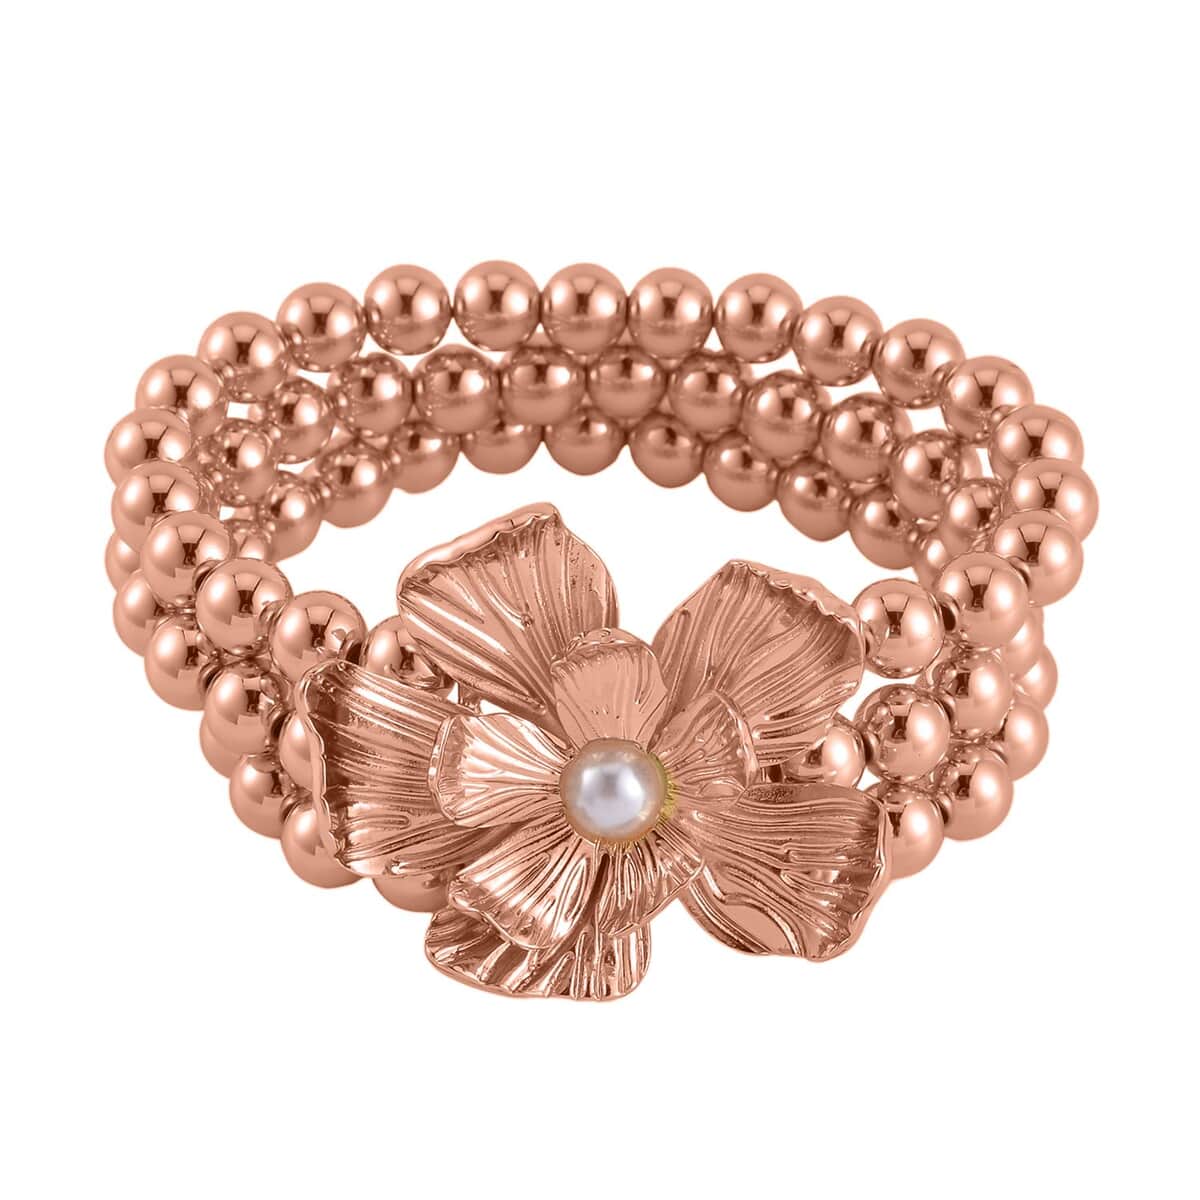 Simulated Pearl Flower Necklace and Bracelet (7-7.5In) and Earrings in Rosetone 16-20 Inches image number 4